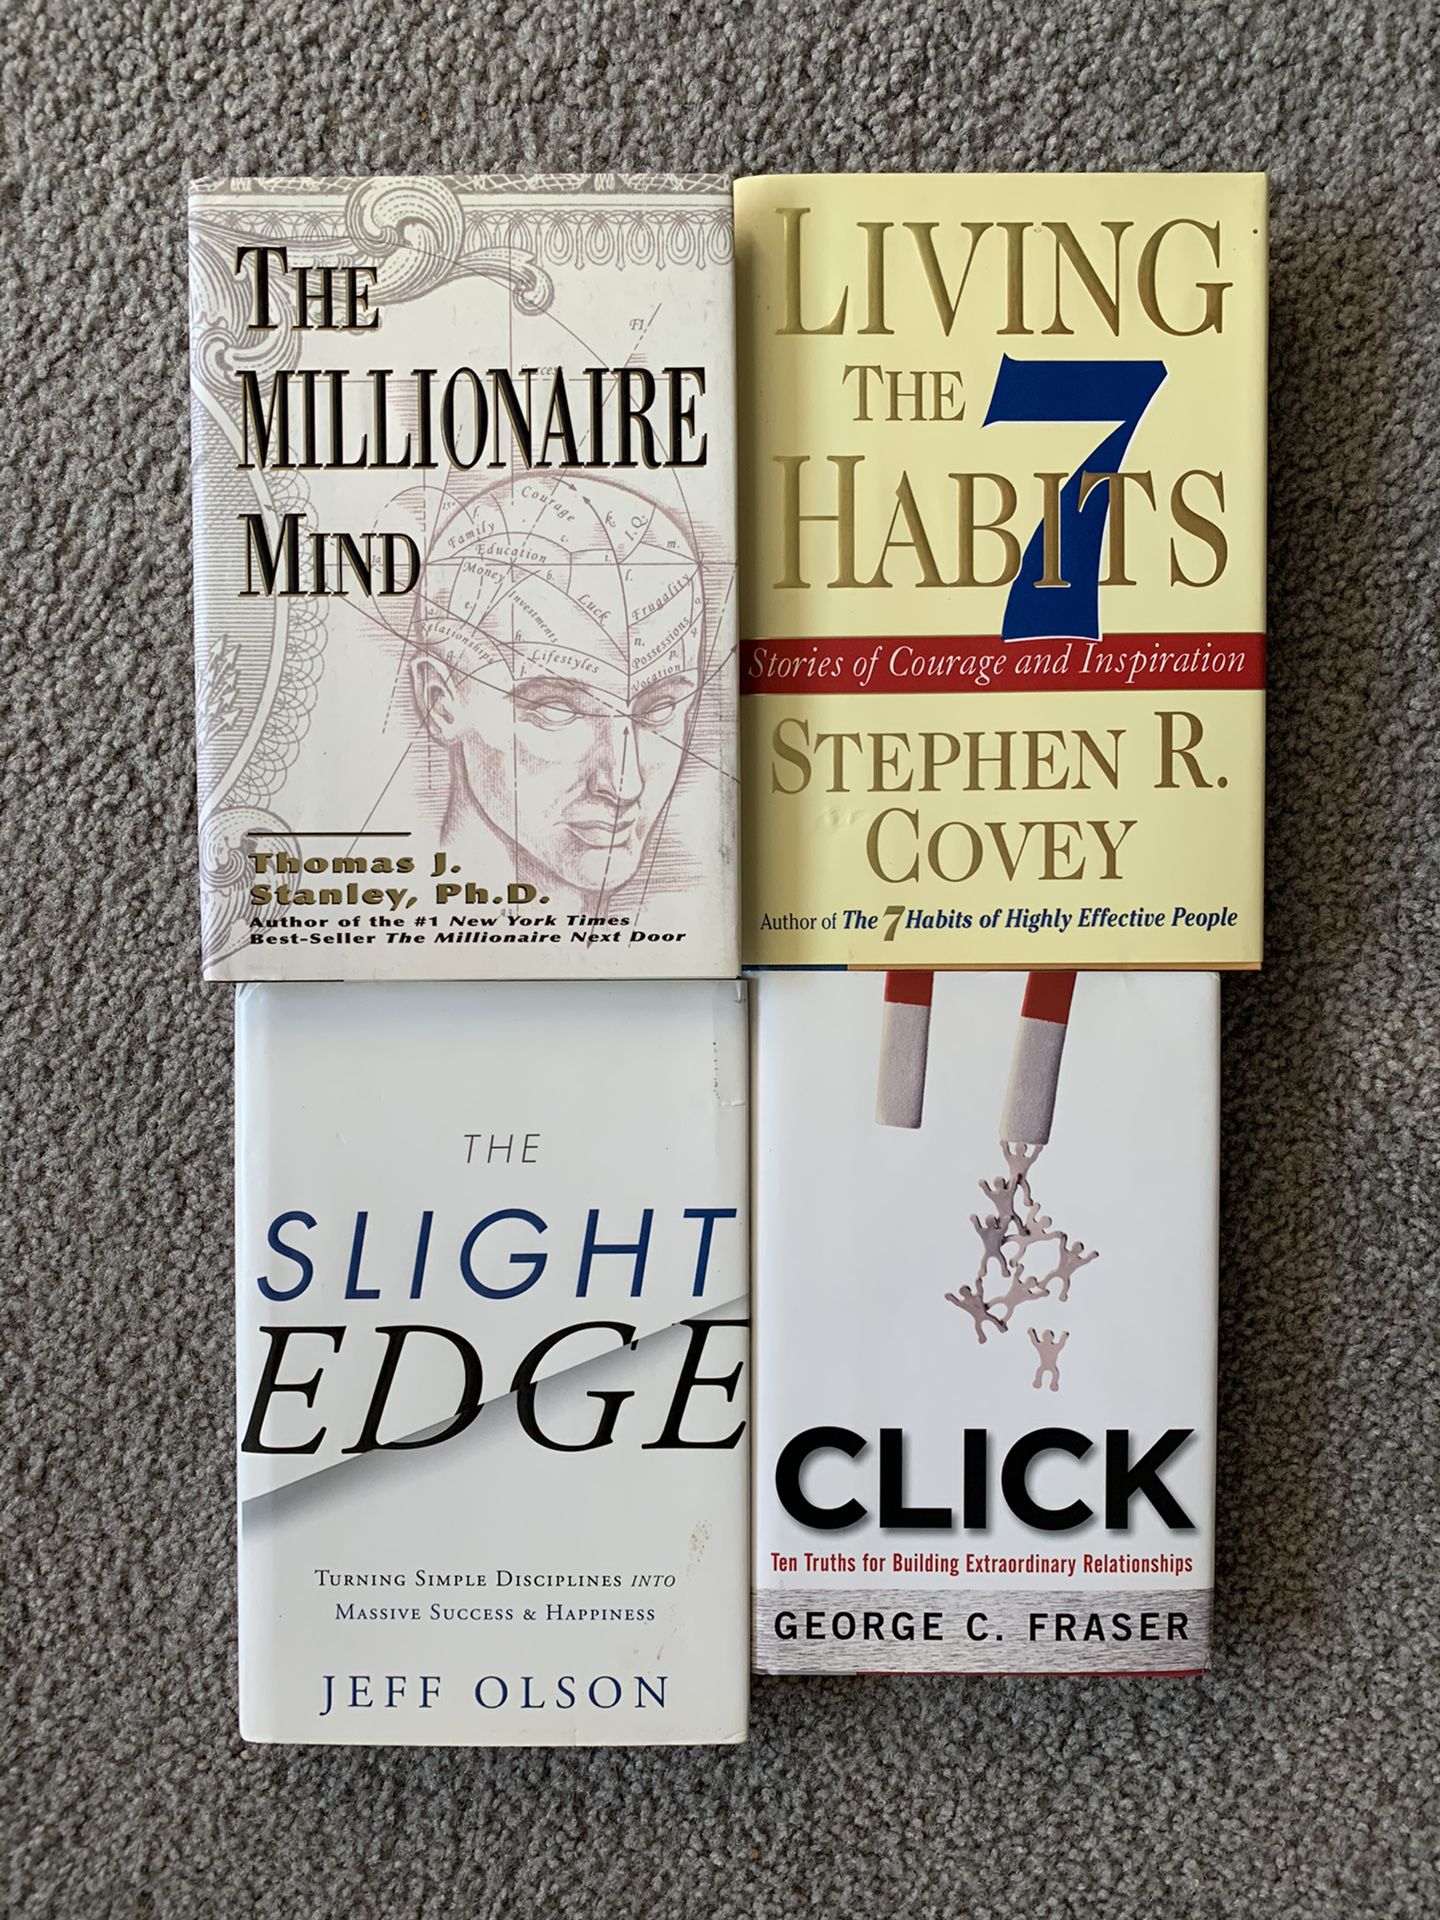 Brand New & Used Books for Sale